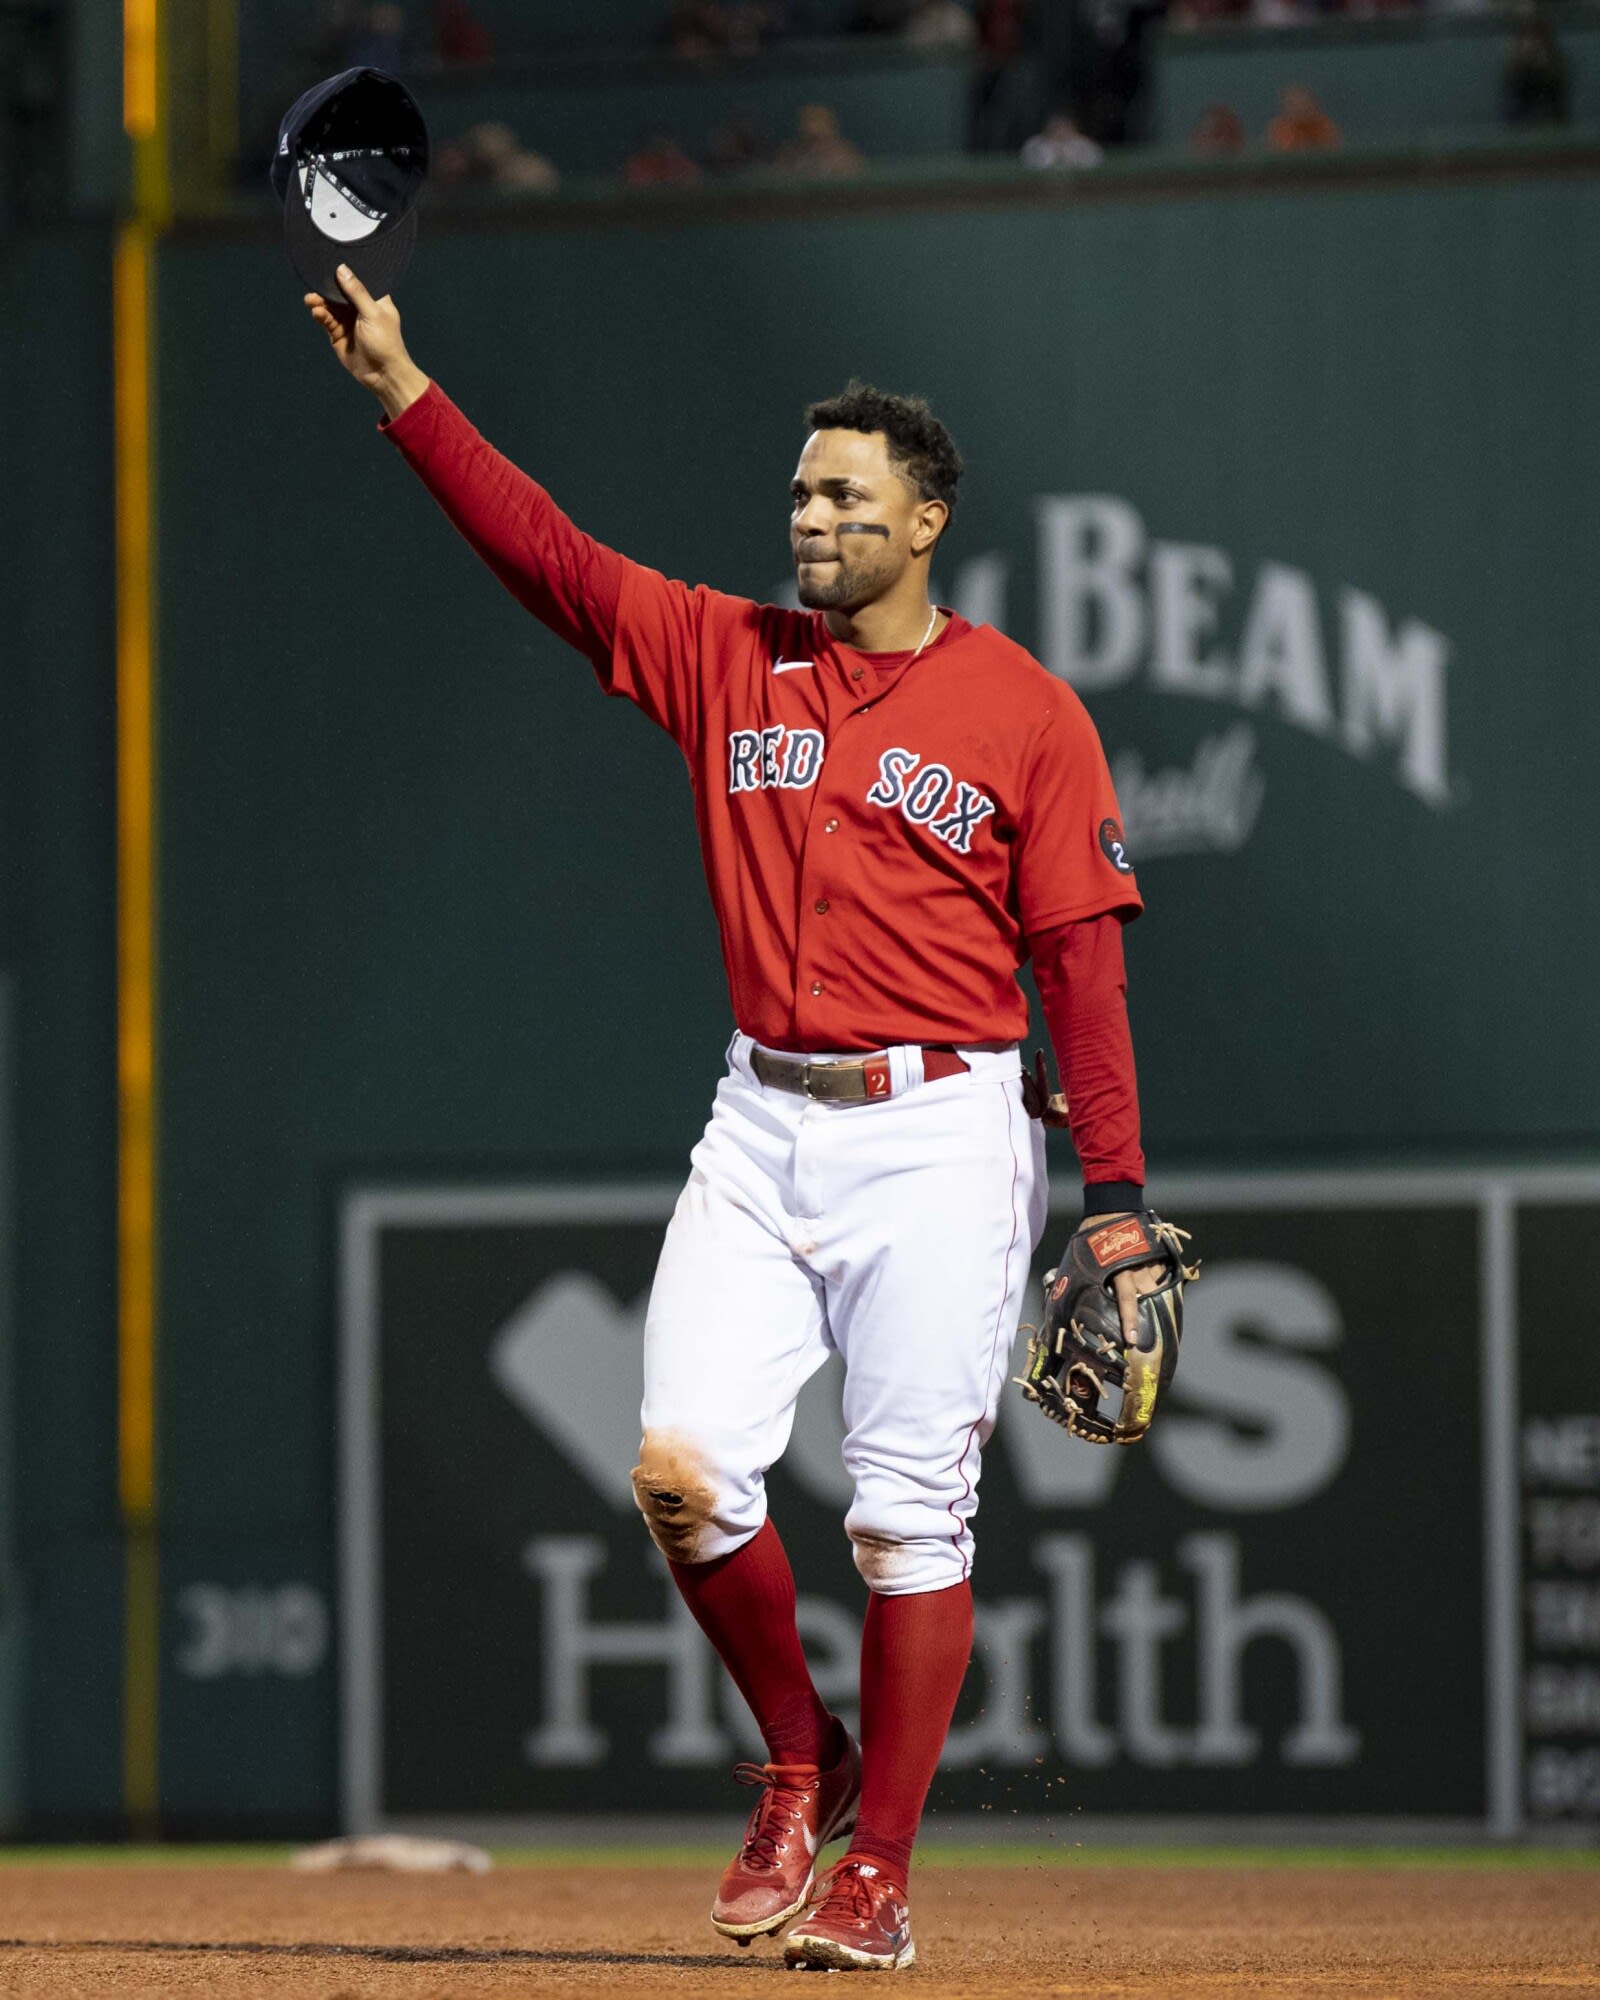 Red Sox' underwhelming farewell to Xander Bogaerts compounds the